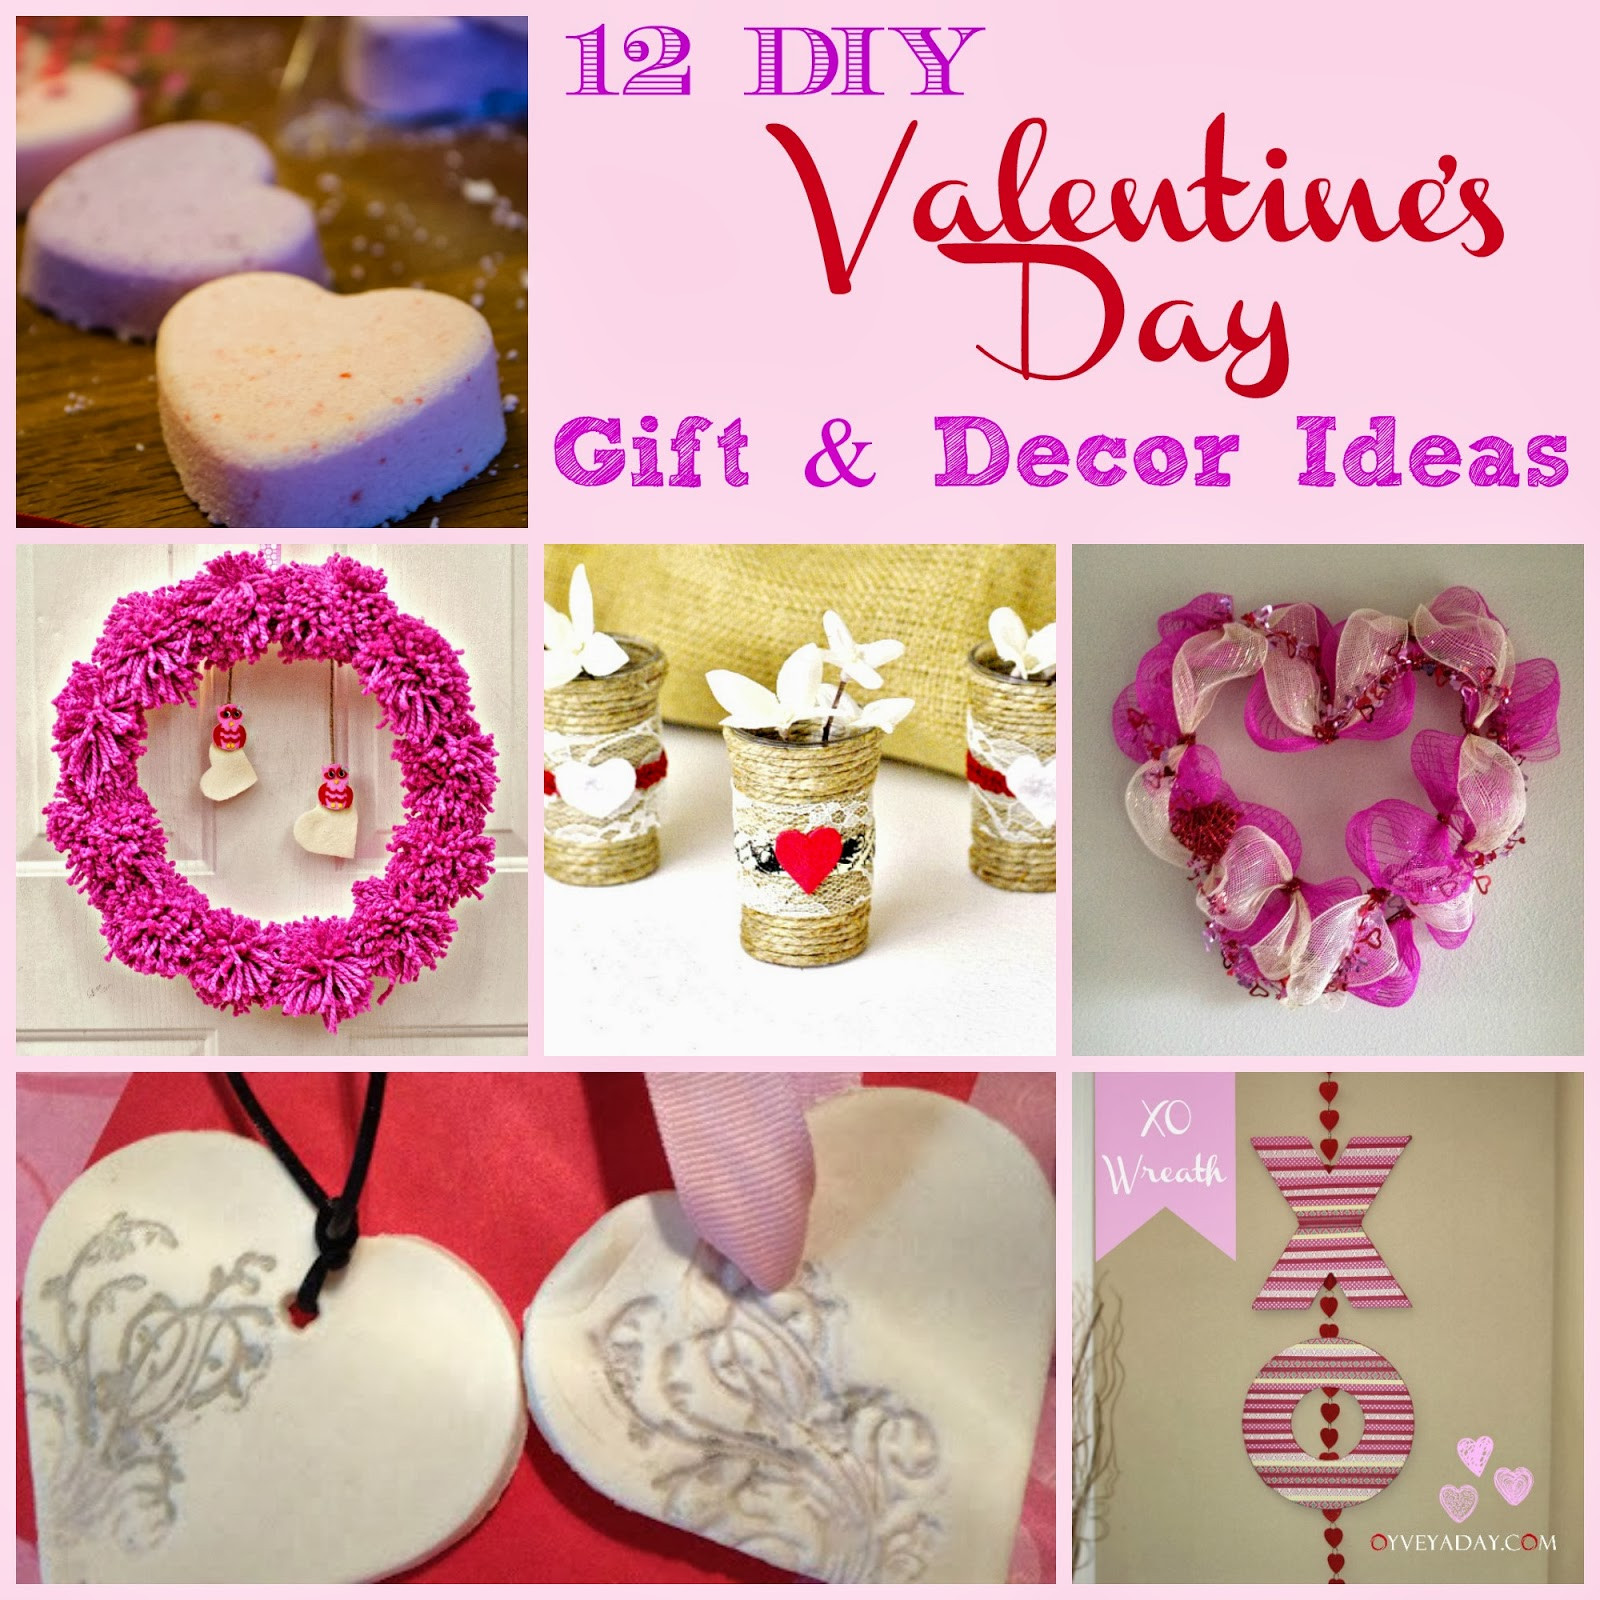 Home Made Gift Ideas For Valentines Day
 12 DIY Valentine s Day Gift & Decor Ideas Outnumbered 3 to 1